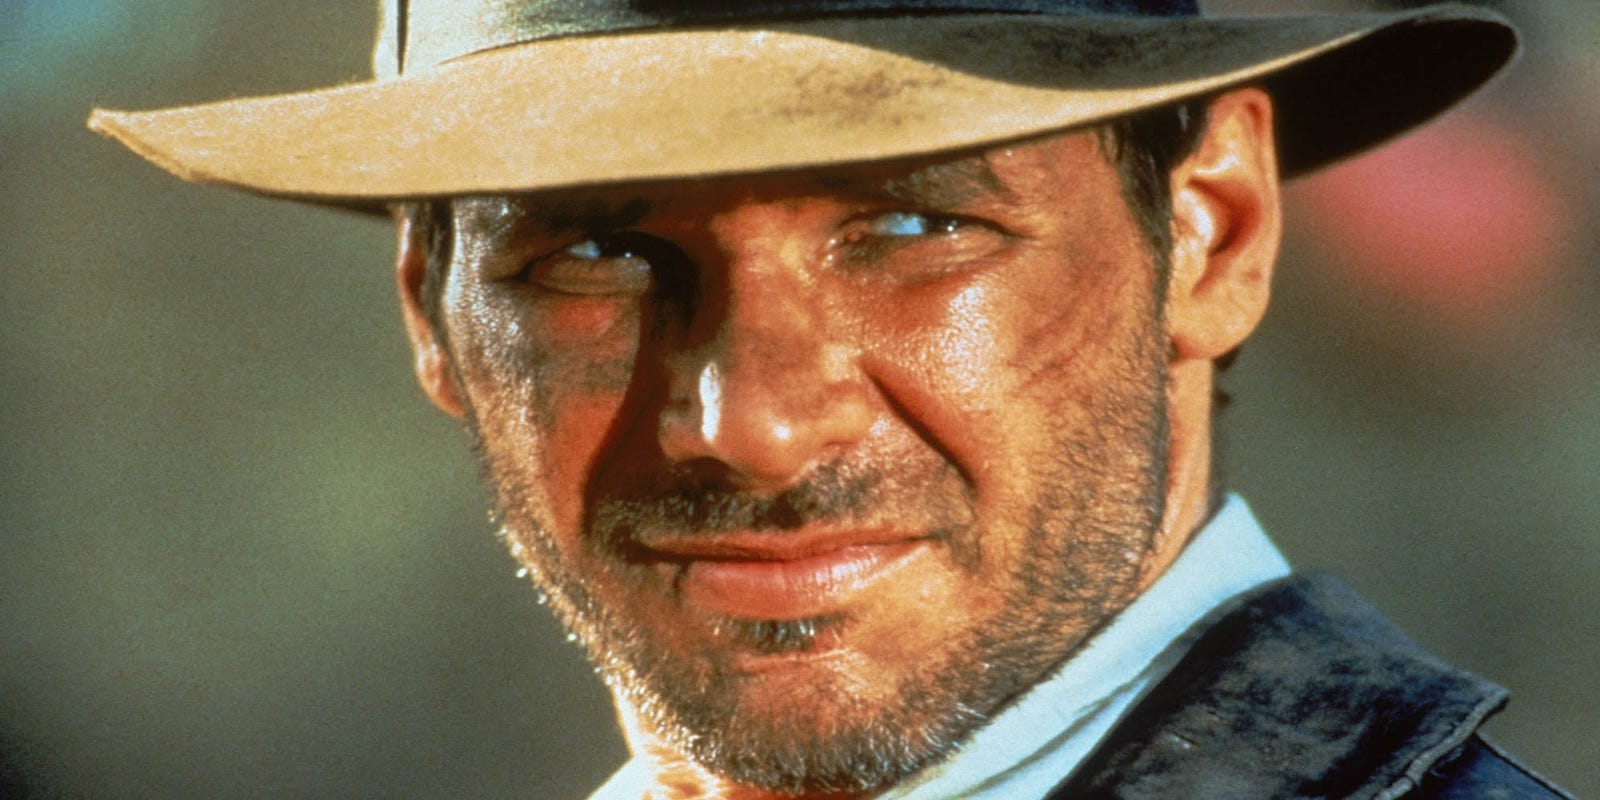 Indiana Jones Films Returning To Theaters